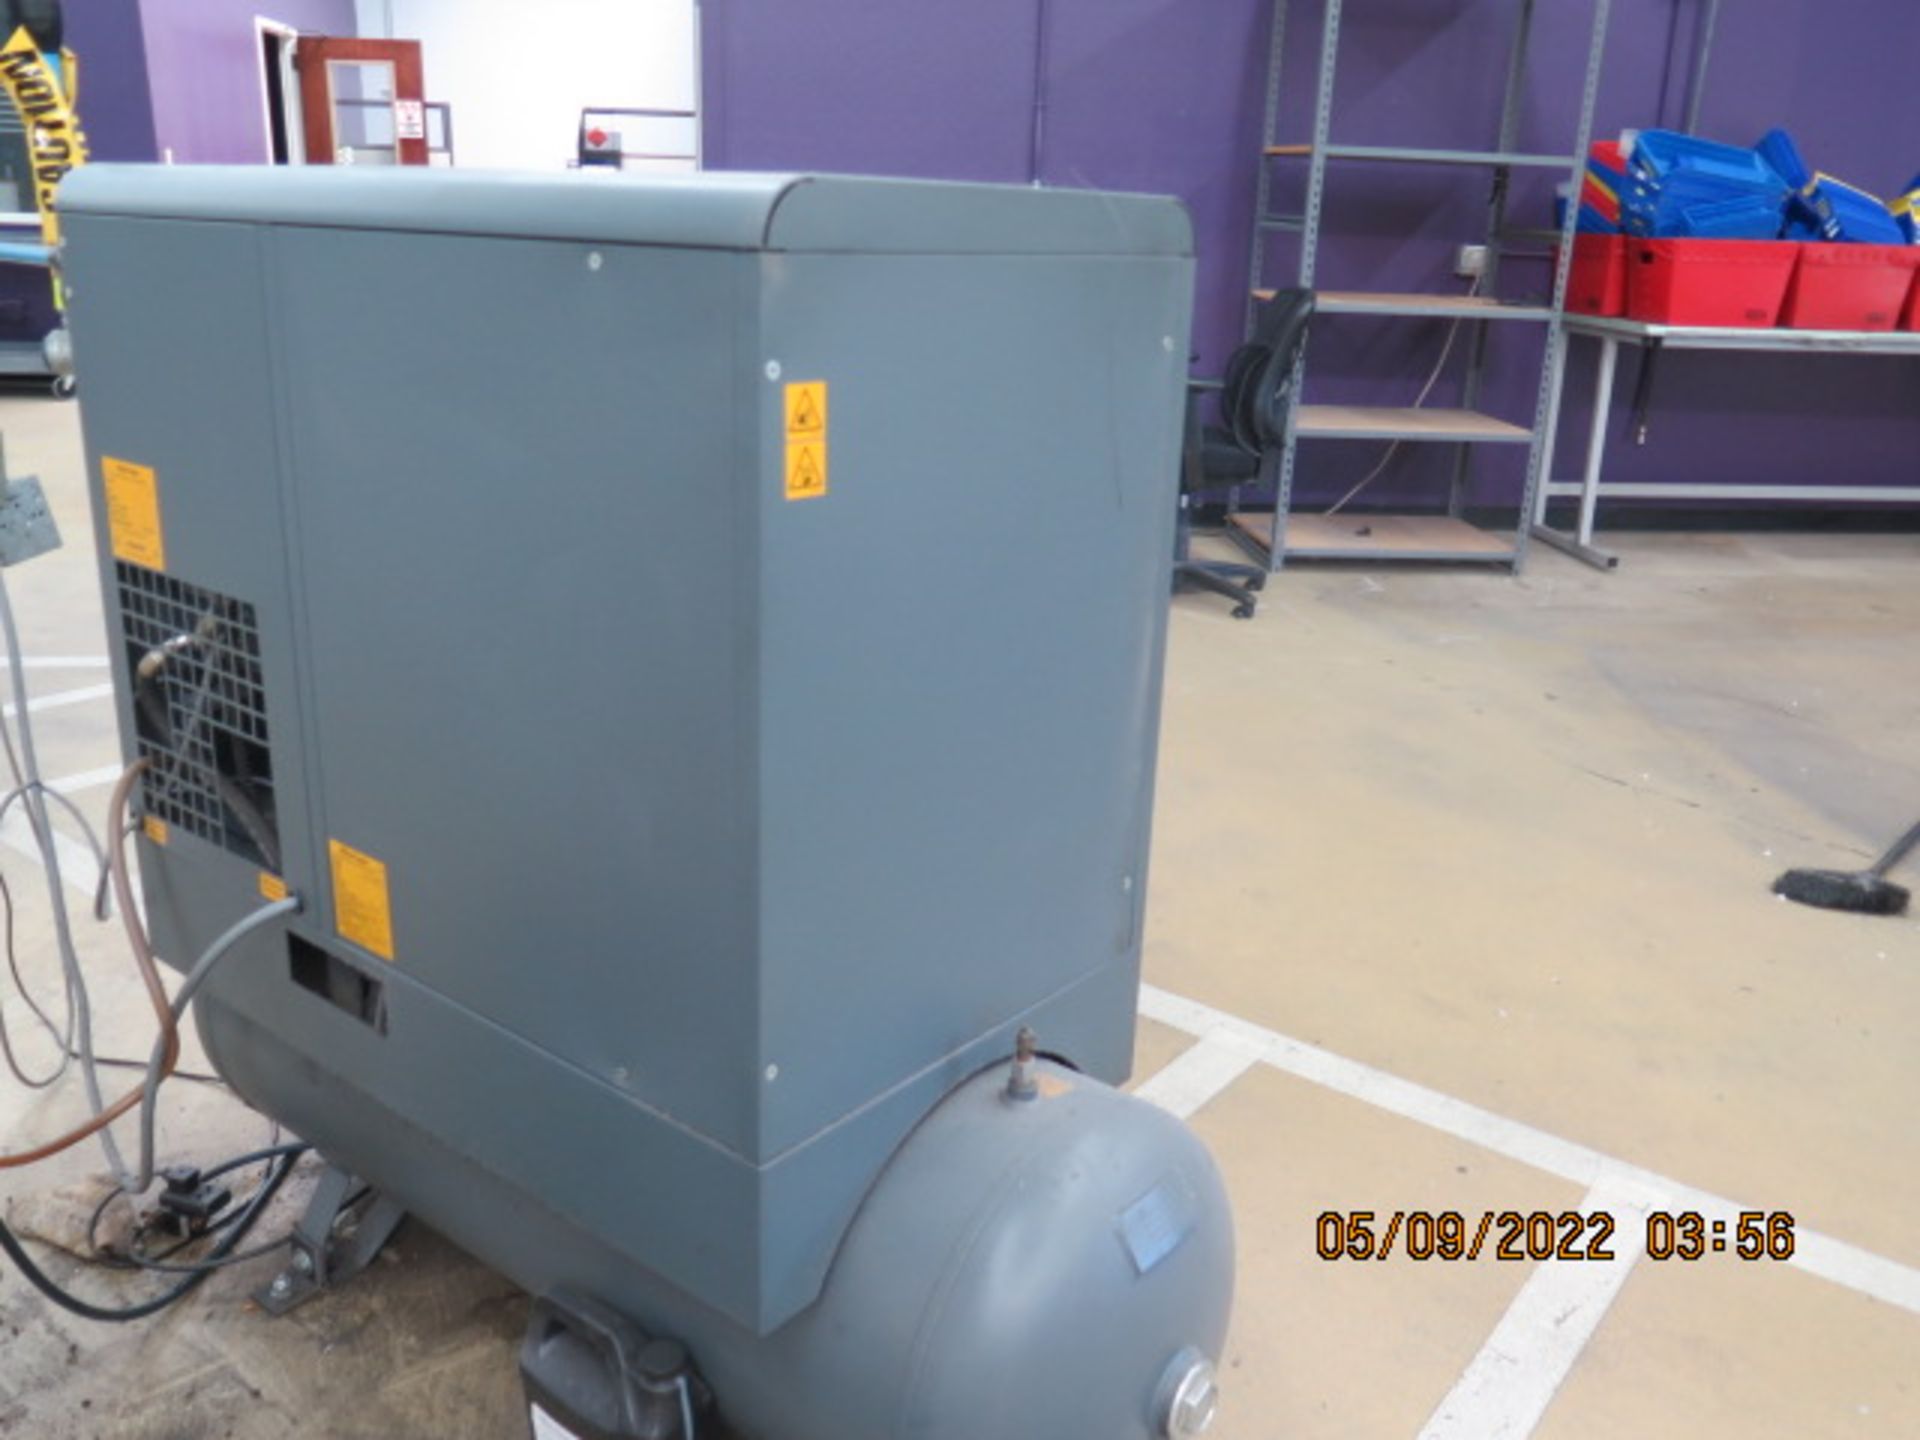 2004 Atlas Copco GX4 FF CSA/UL 5Hp Rotary Air Comp s/n AII643096 w/ Built-In Air Dryer, SOLD AS IS - Image 4 of 9